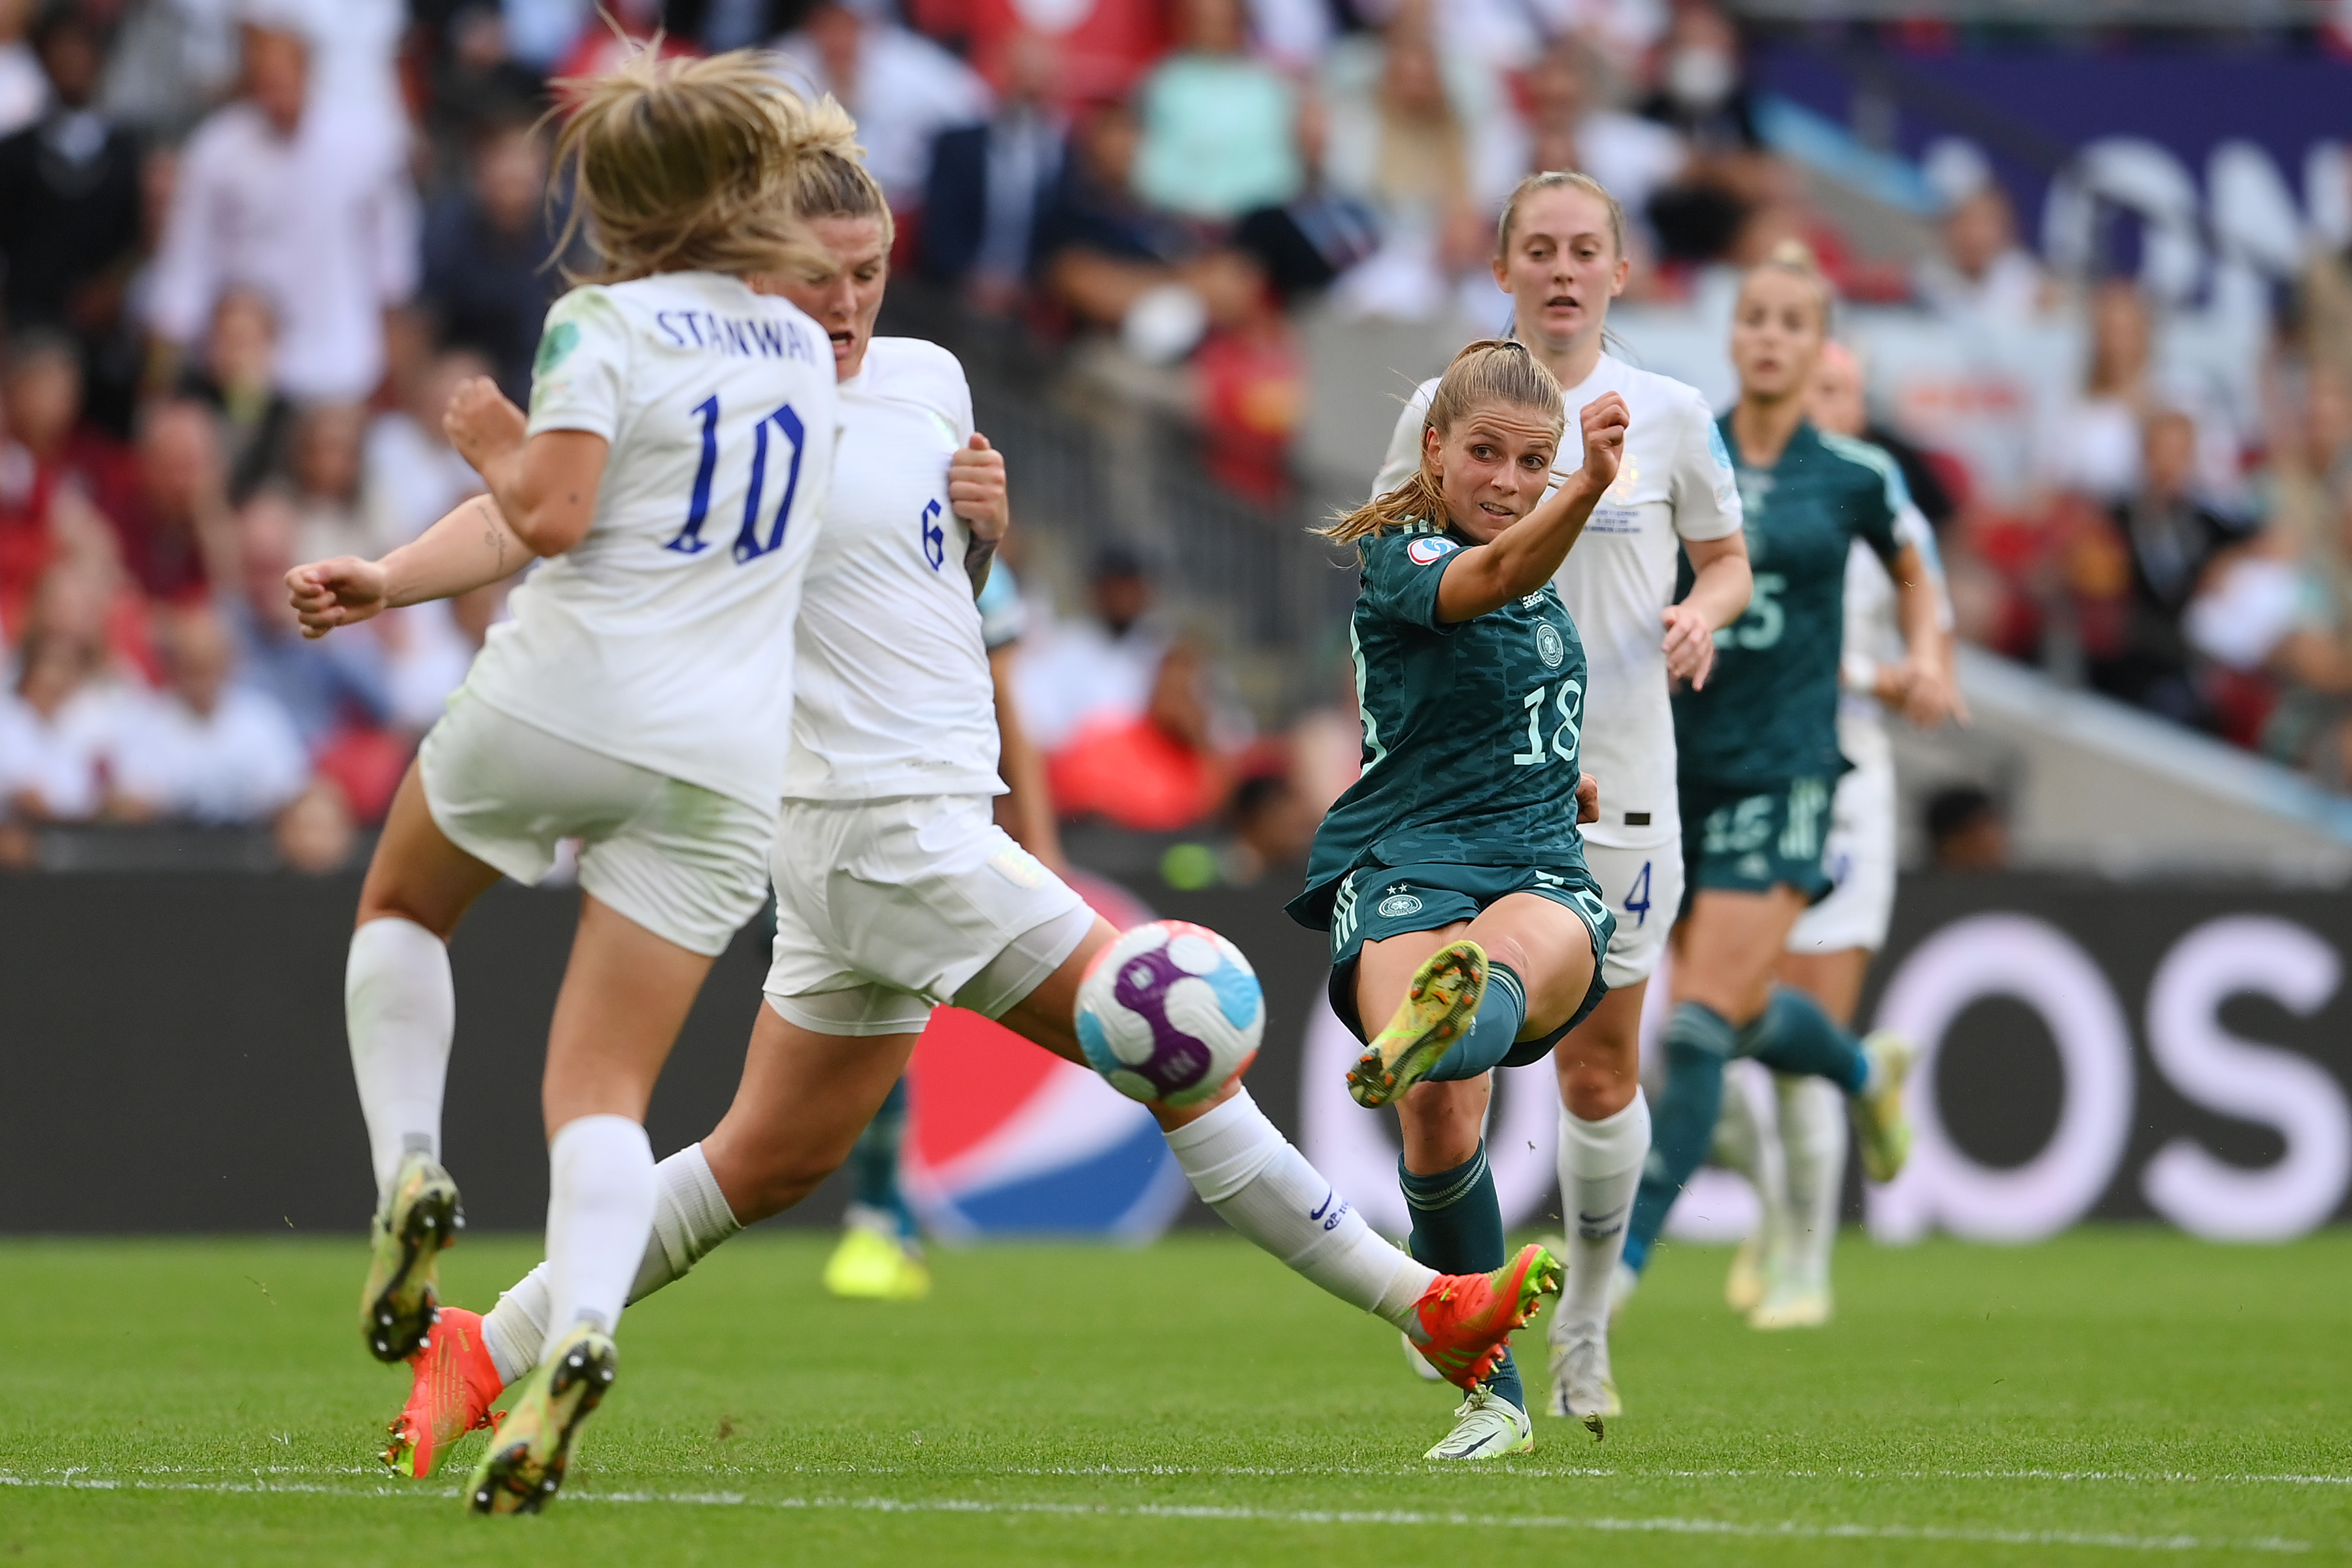 Millie Bright and Georgia Stanway converge to deflect Tabea Waßmuth’s shot as teammates look on.